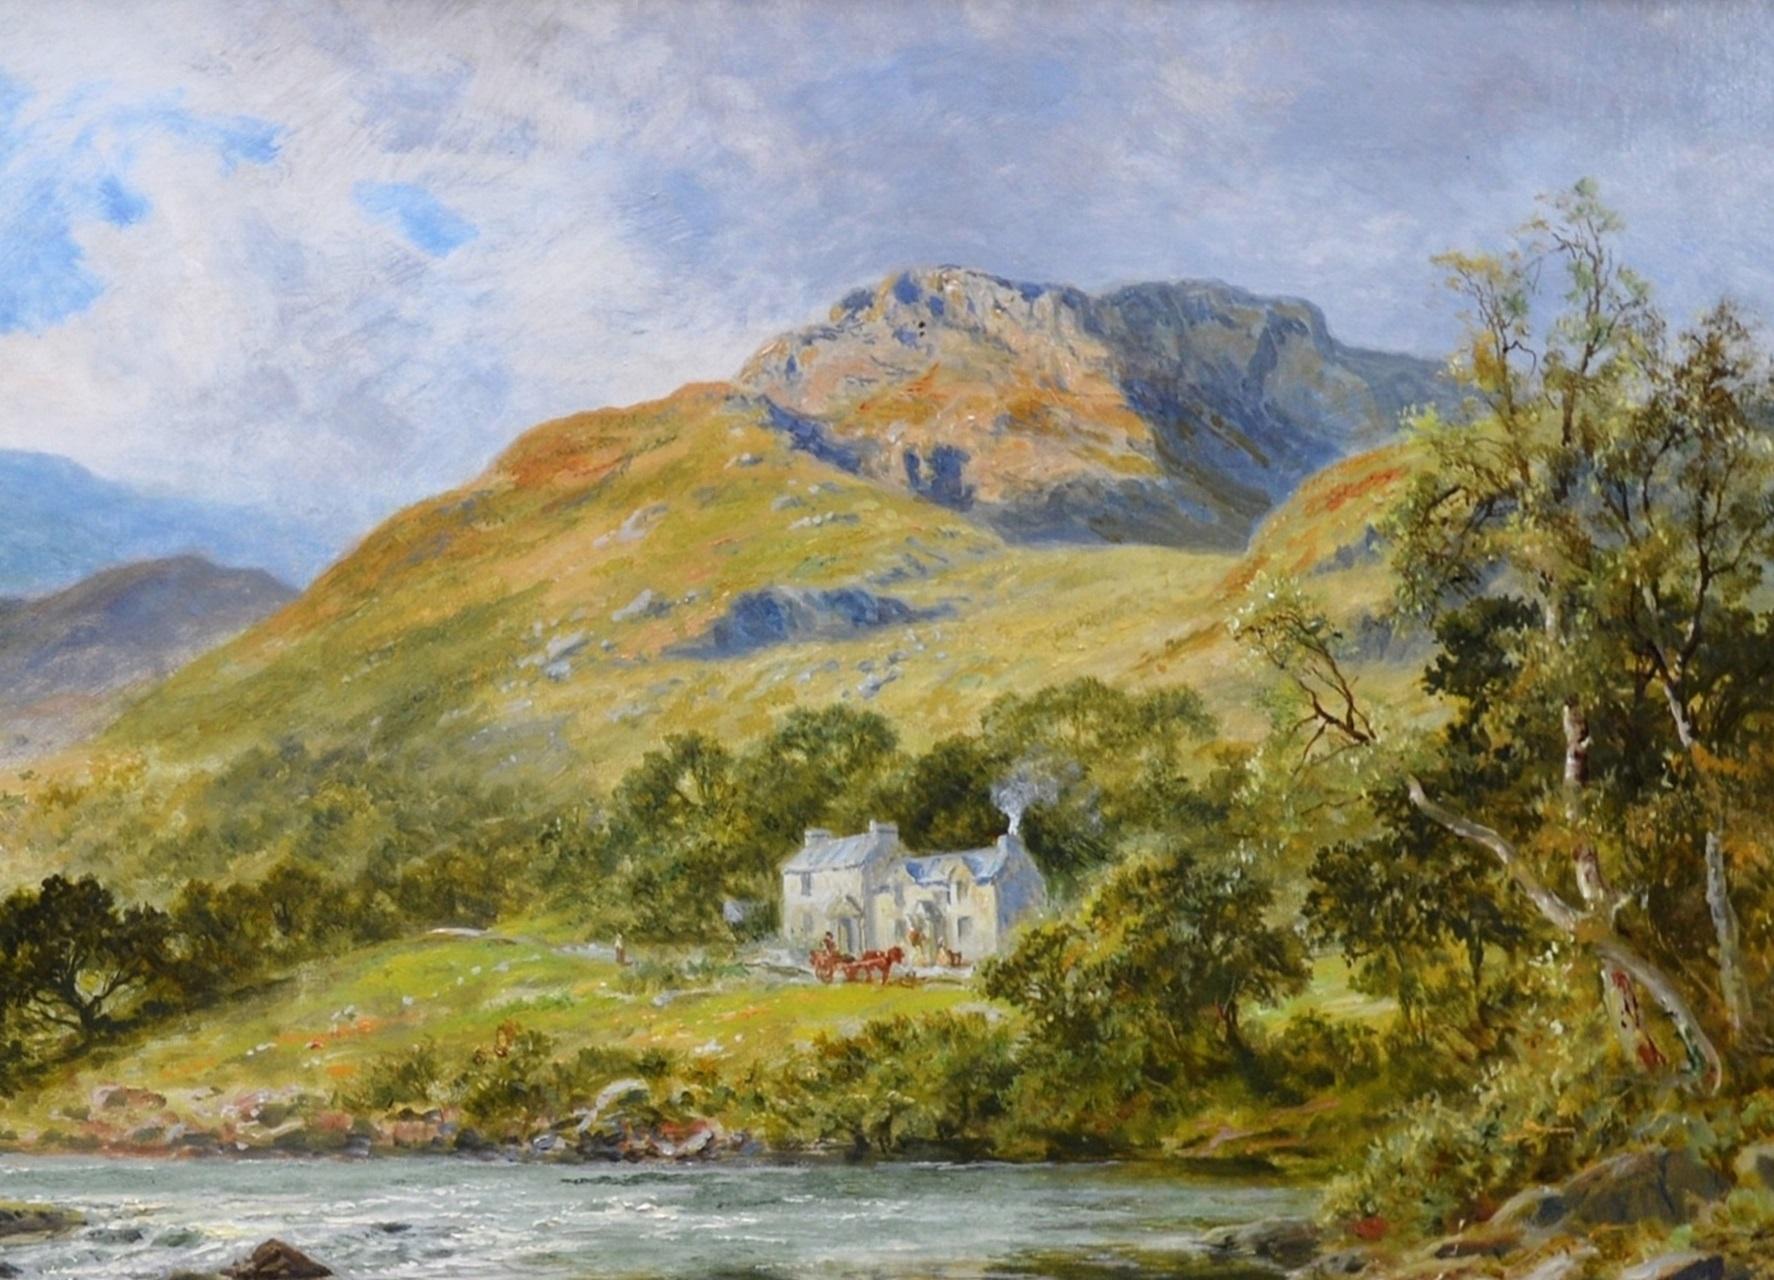 The Fish Inn, Lledr Valley - 19th Century Landscape Oil Painting River Fishing - Brown Landscape Painting by Robert Gallon